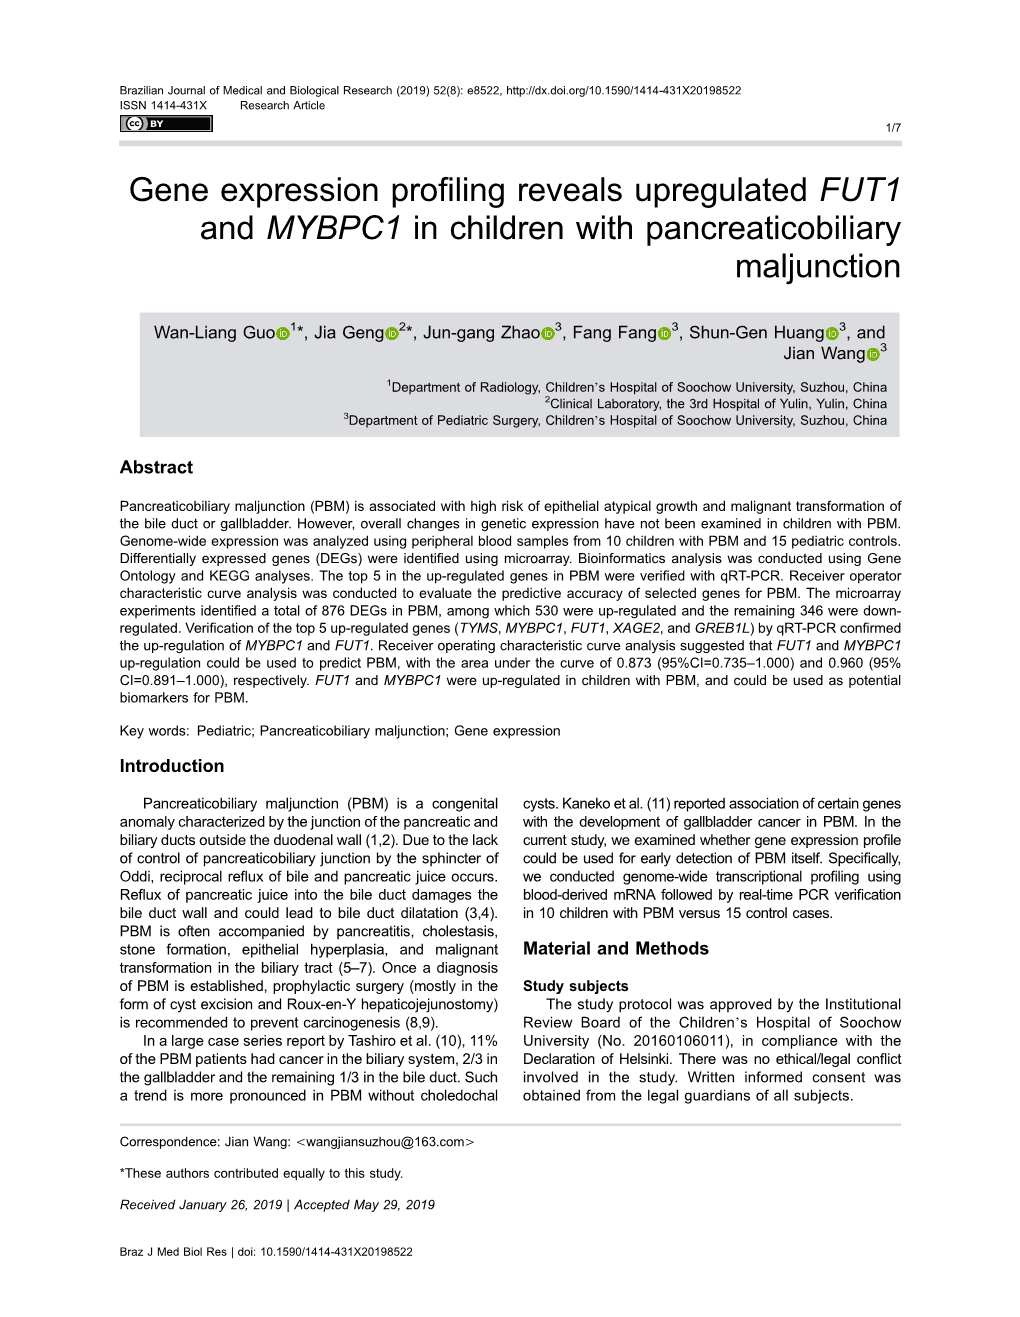 Gene Expression Profiling Reveals Upregulated FUT1 and MYBPC1 in Children with Pancreaticobiliary Maljunction